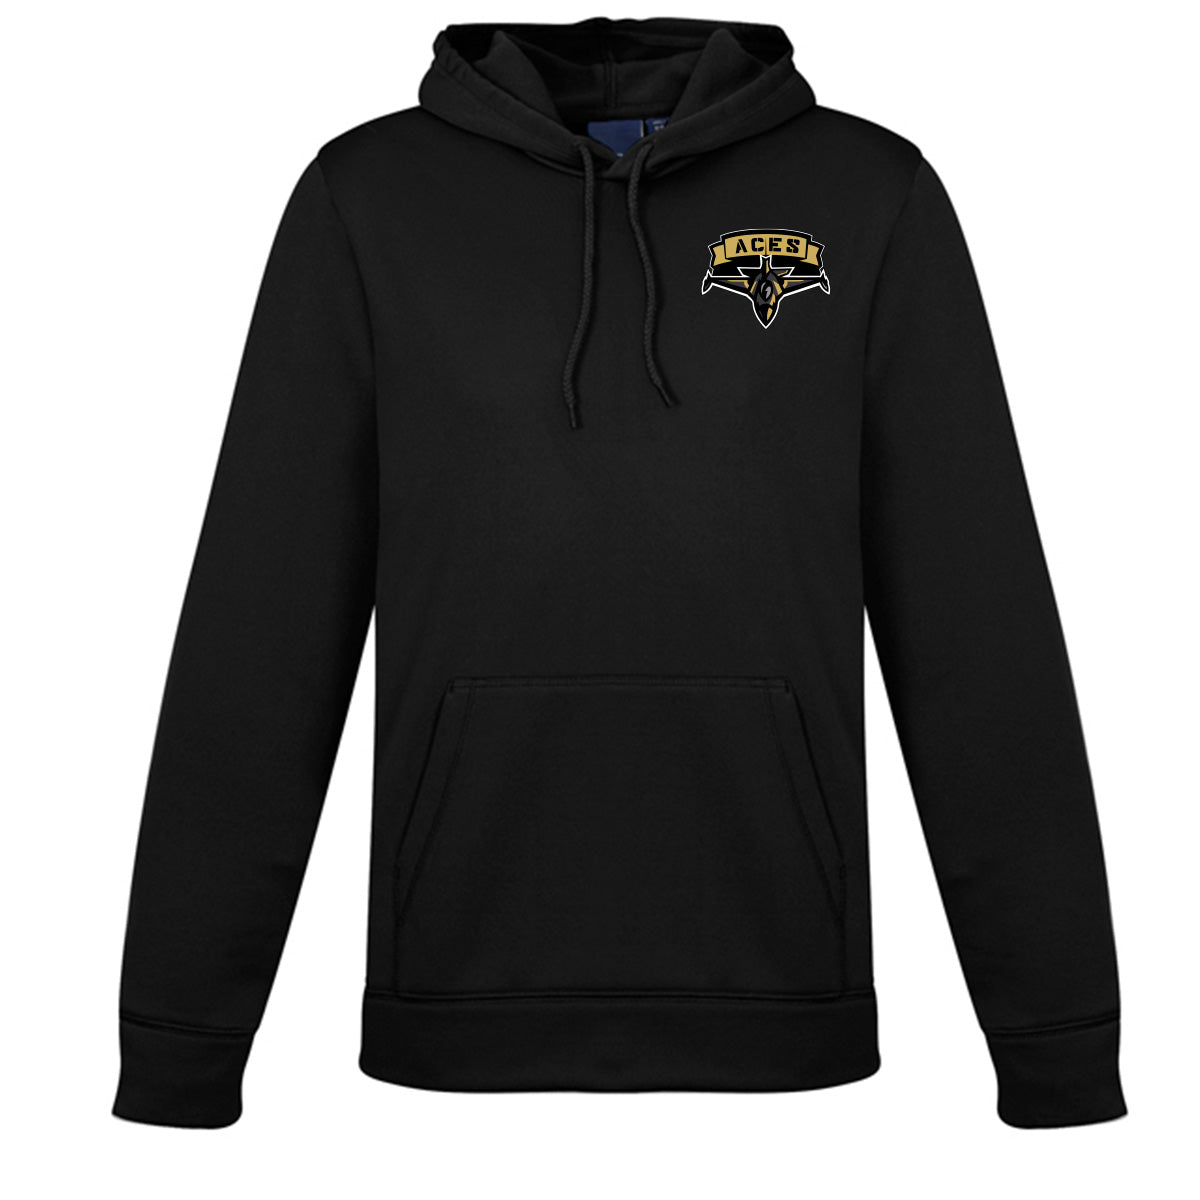 Fraser Valley Aces -- Youth Hype Hoody